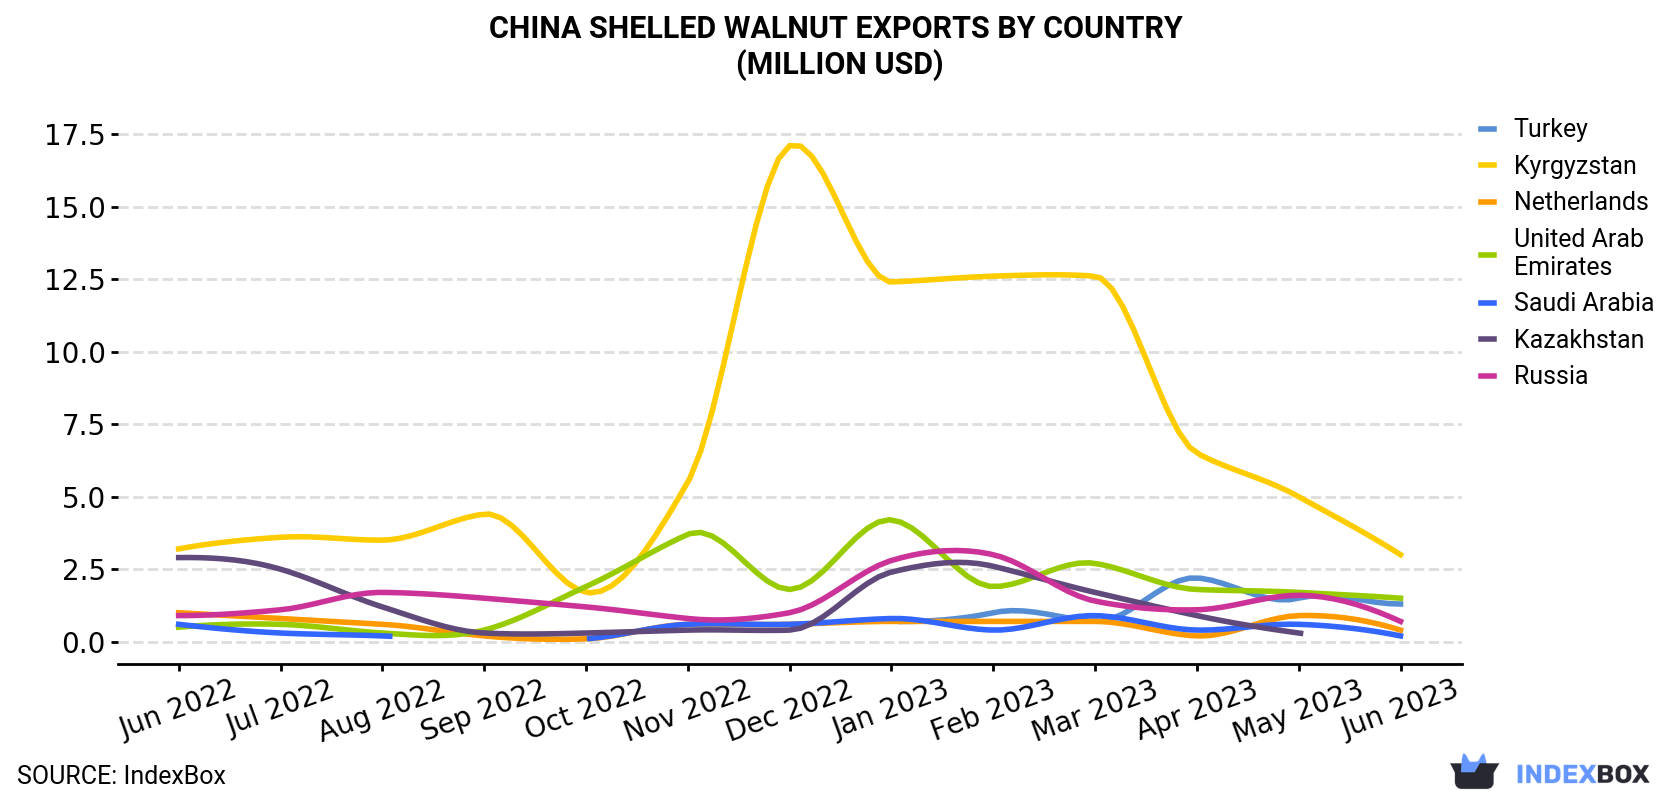 China Shelled Walnut Exports By Country (Million USD)